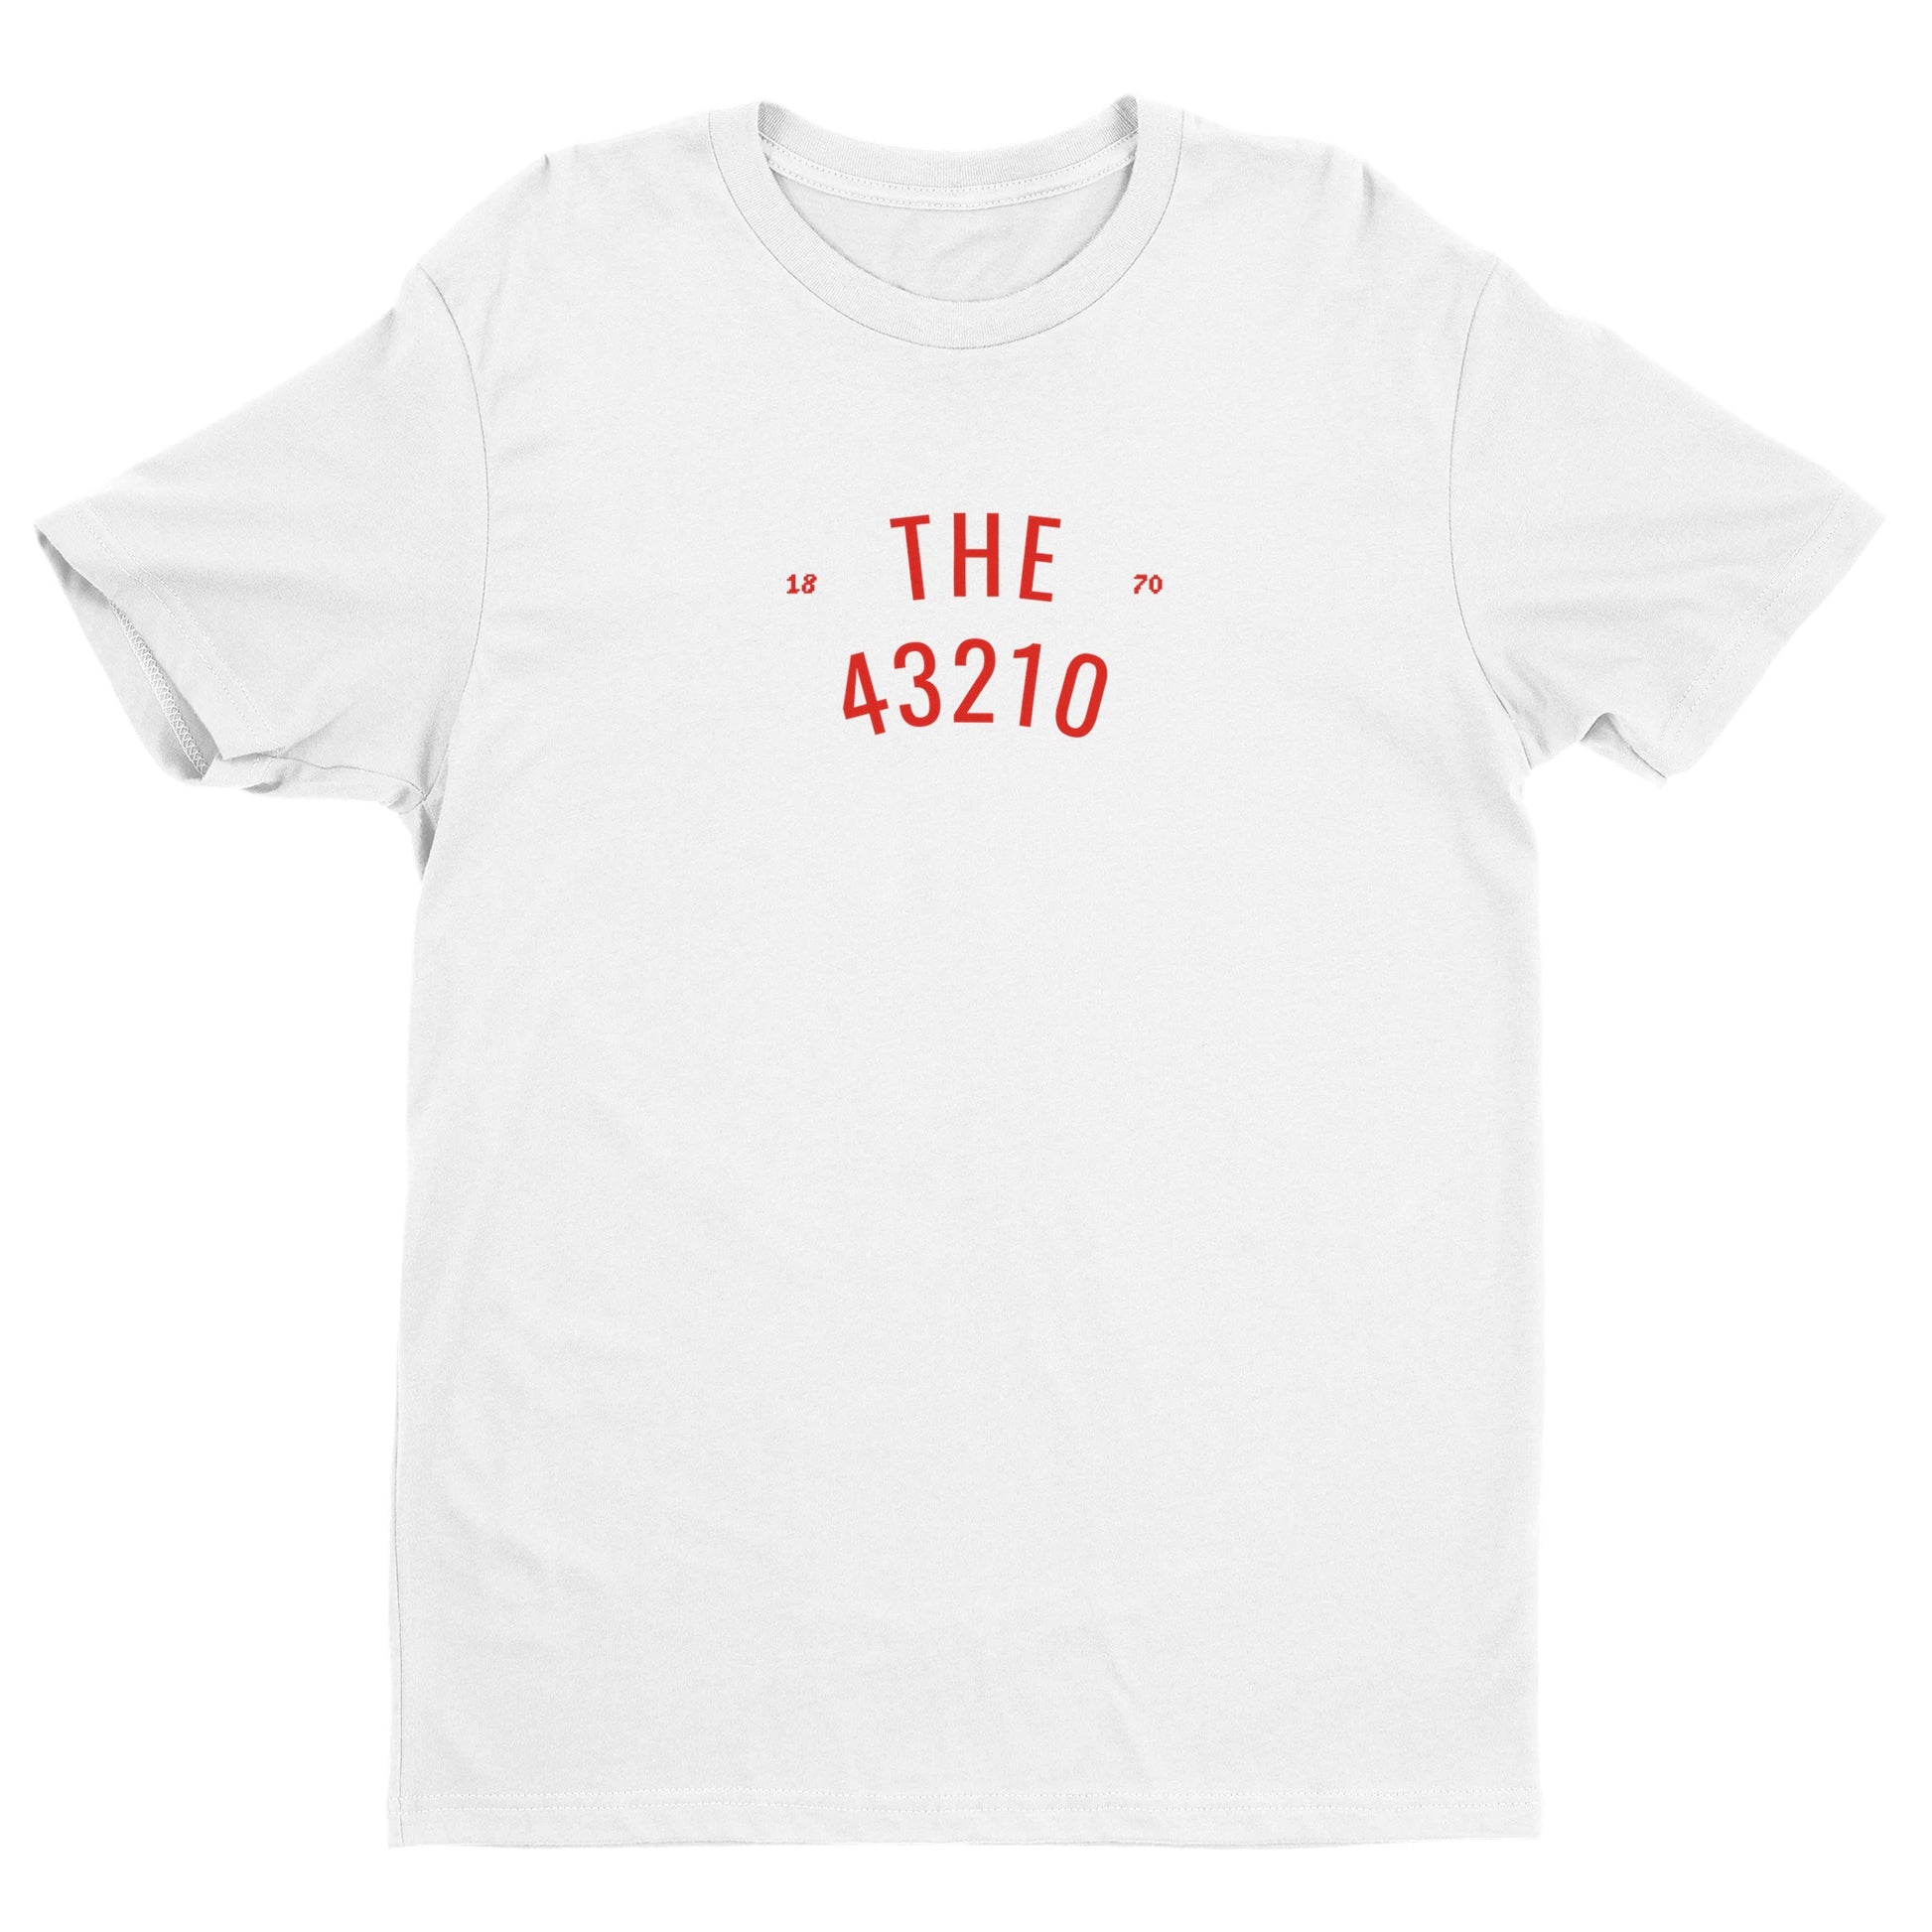 THE 4321 Red Letters